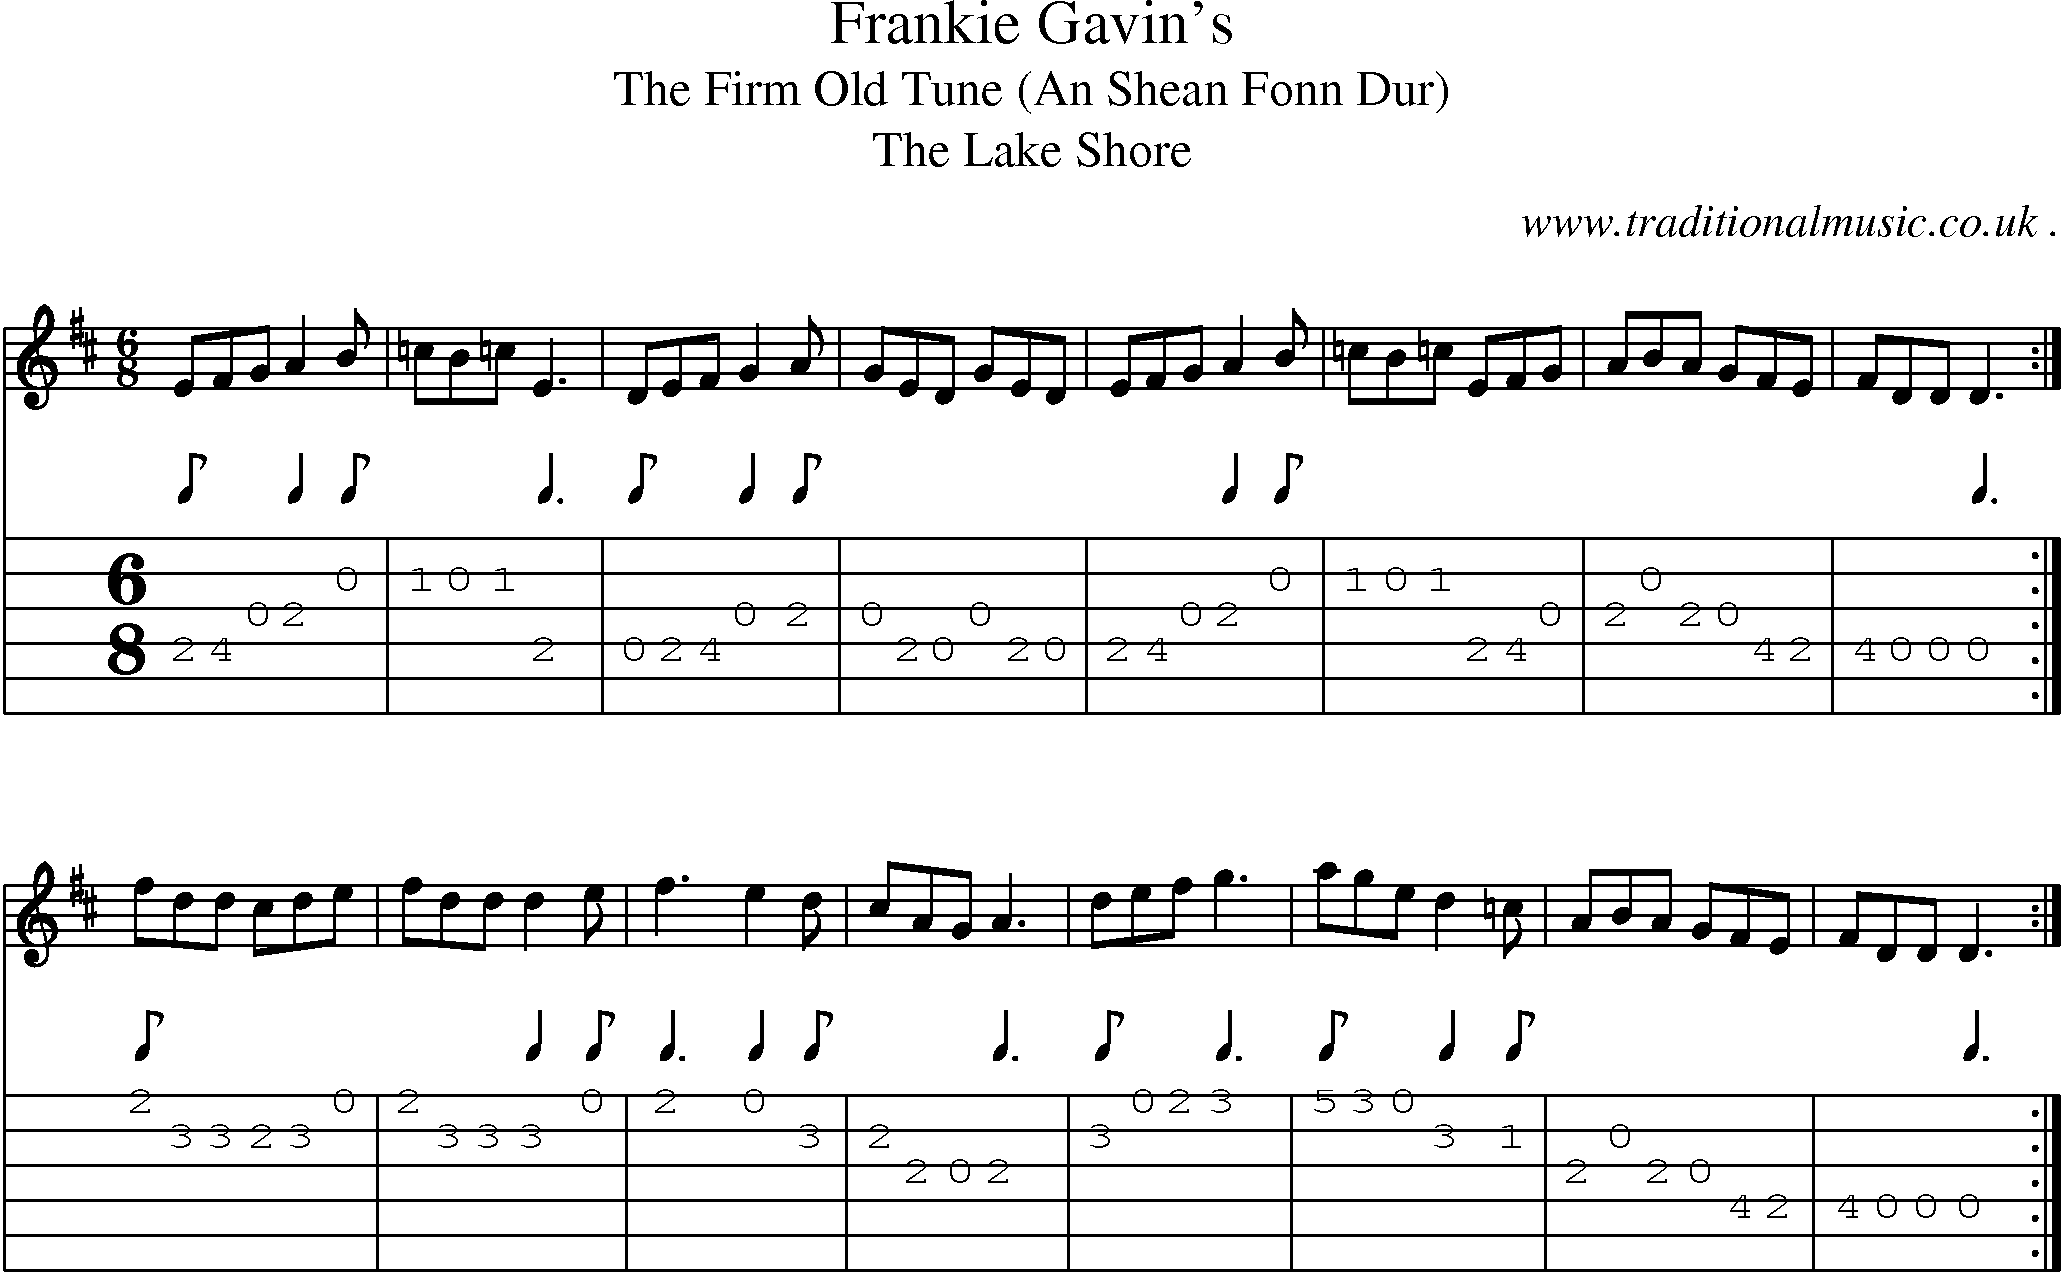 Sheet-Music and Guitar Tabs for Frankie Gavins